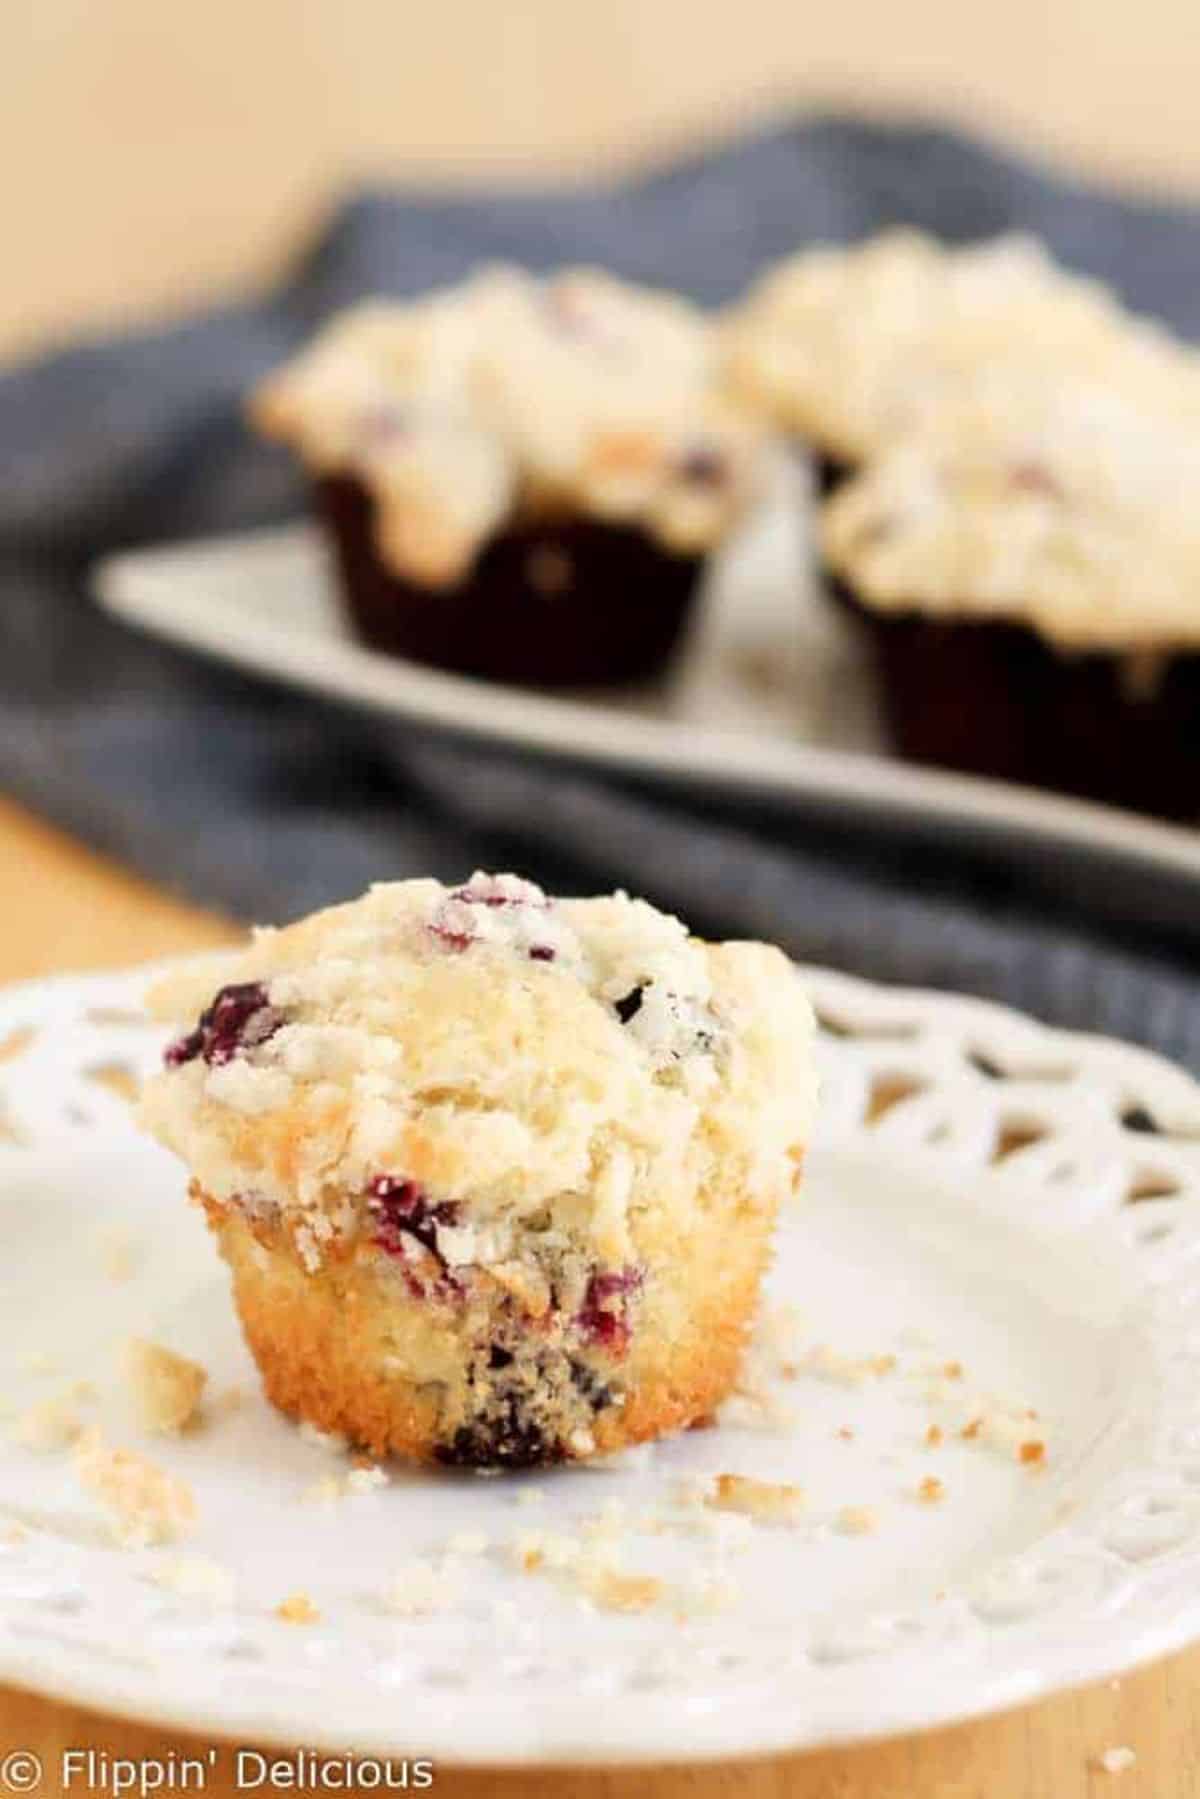 Gluten-free Blueberry Muffin with Streusel Crumb Topping on a white plate.